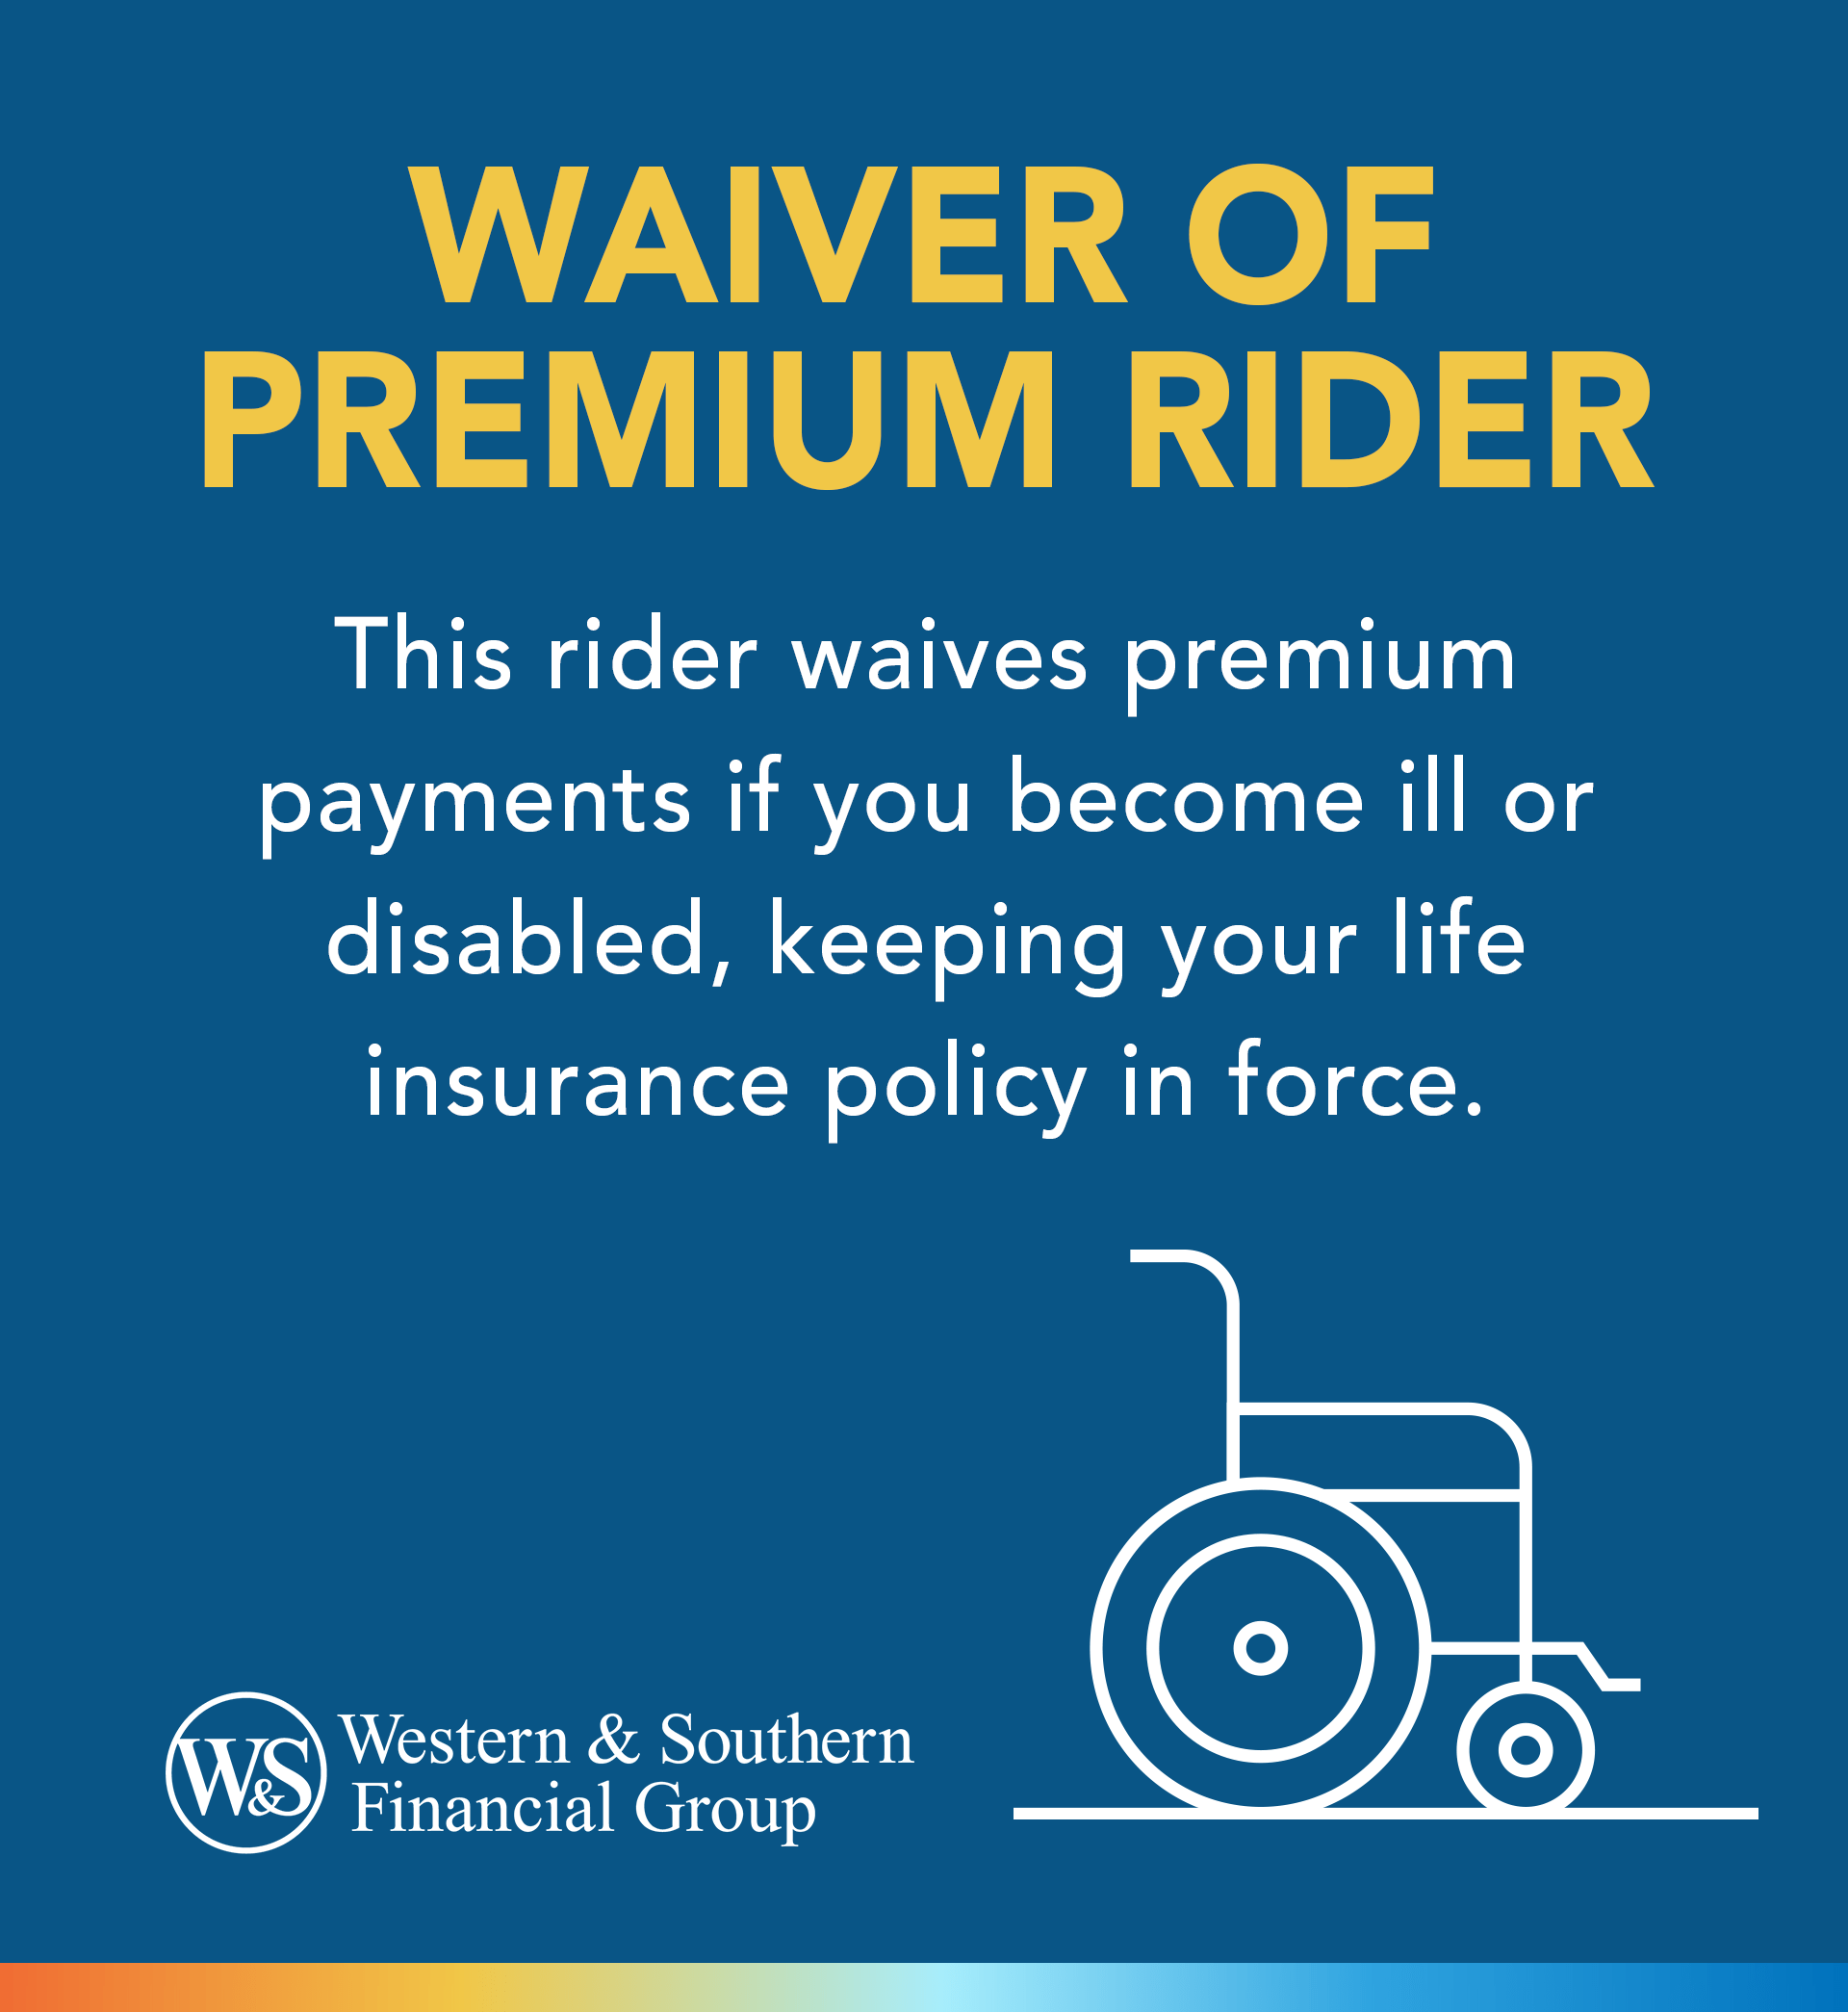 Waiver of Premium definition